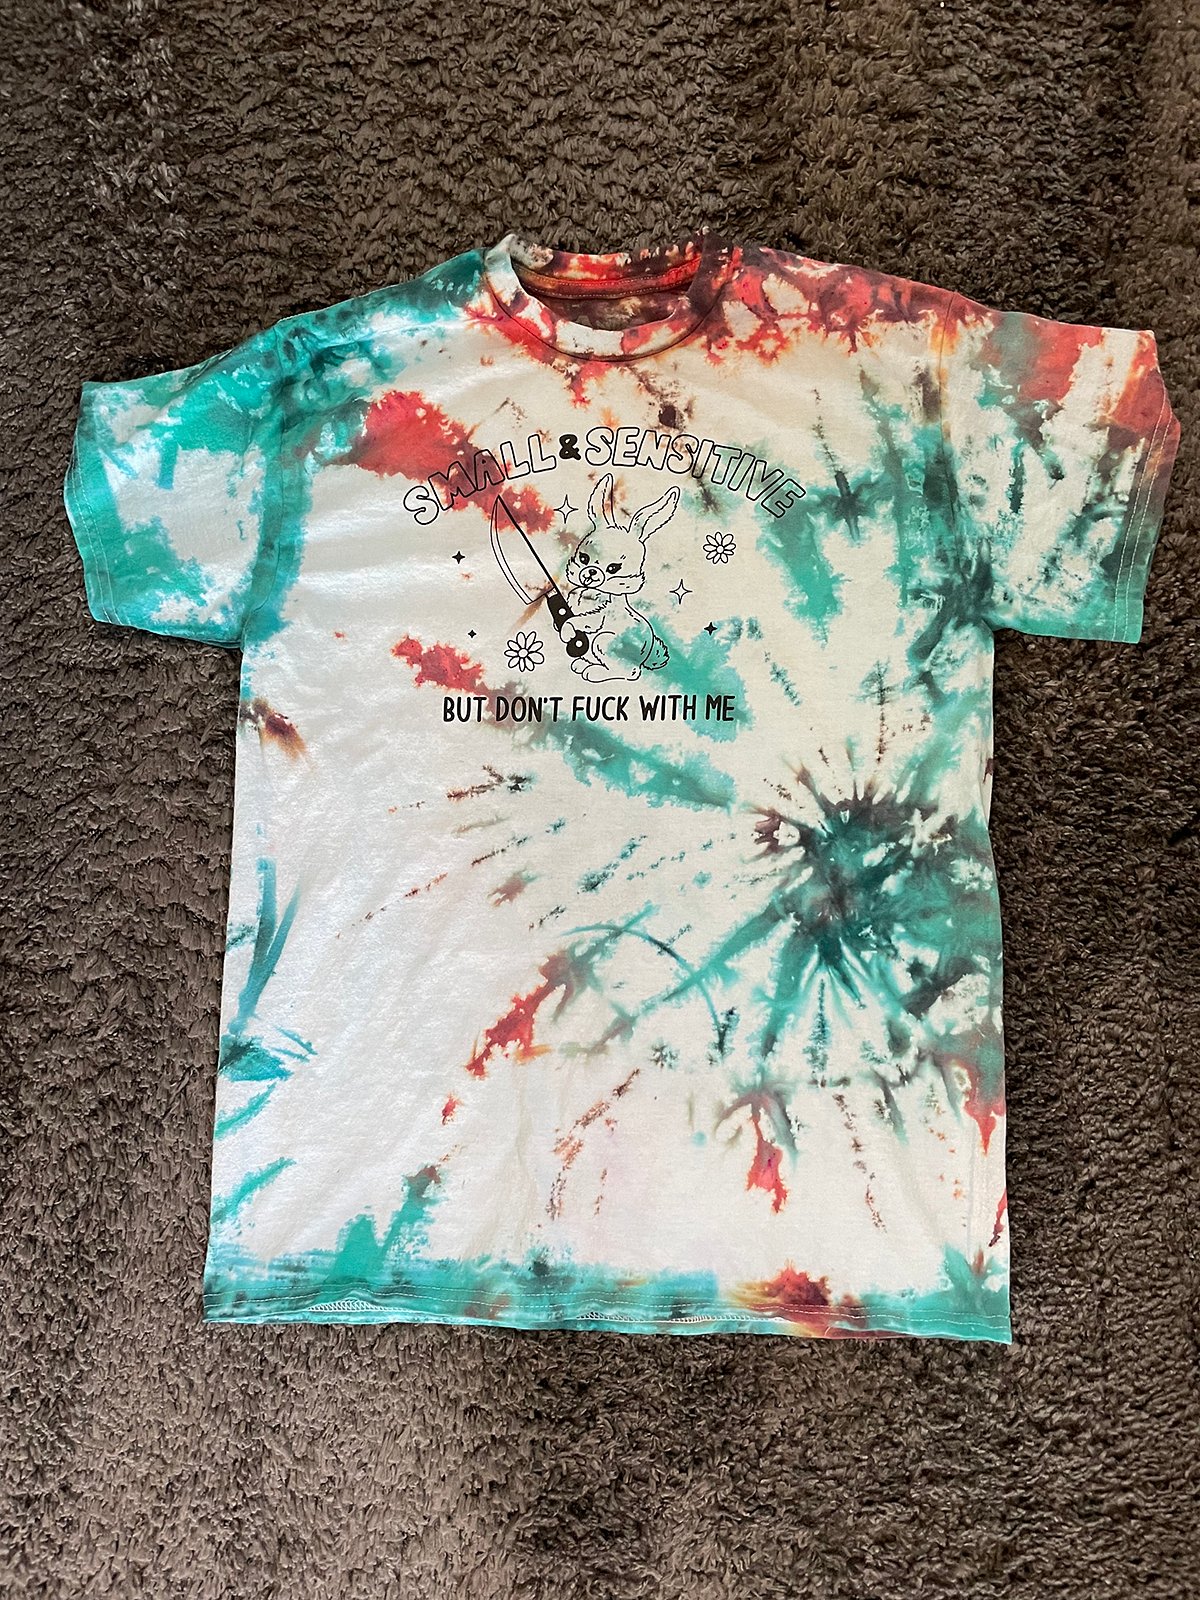 Completed spider DIY tie dye t shirt 